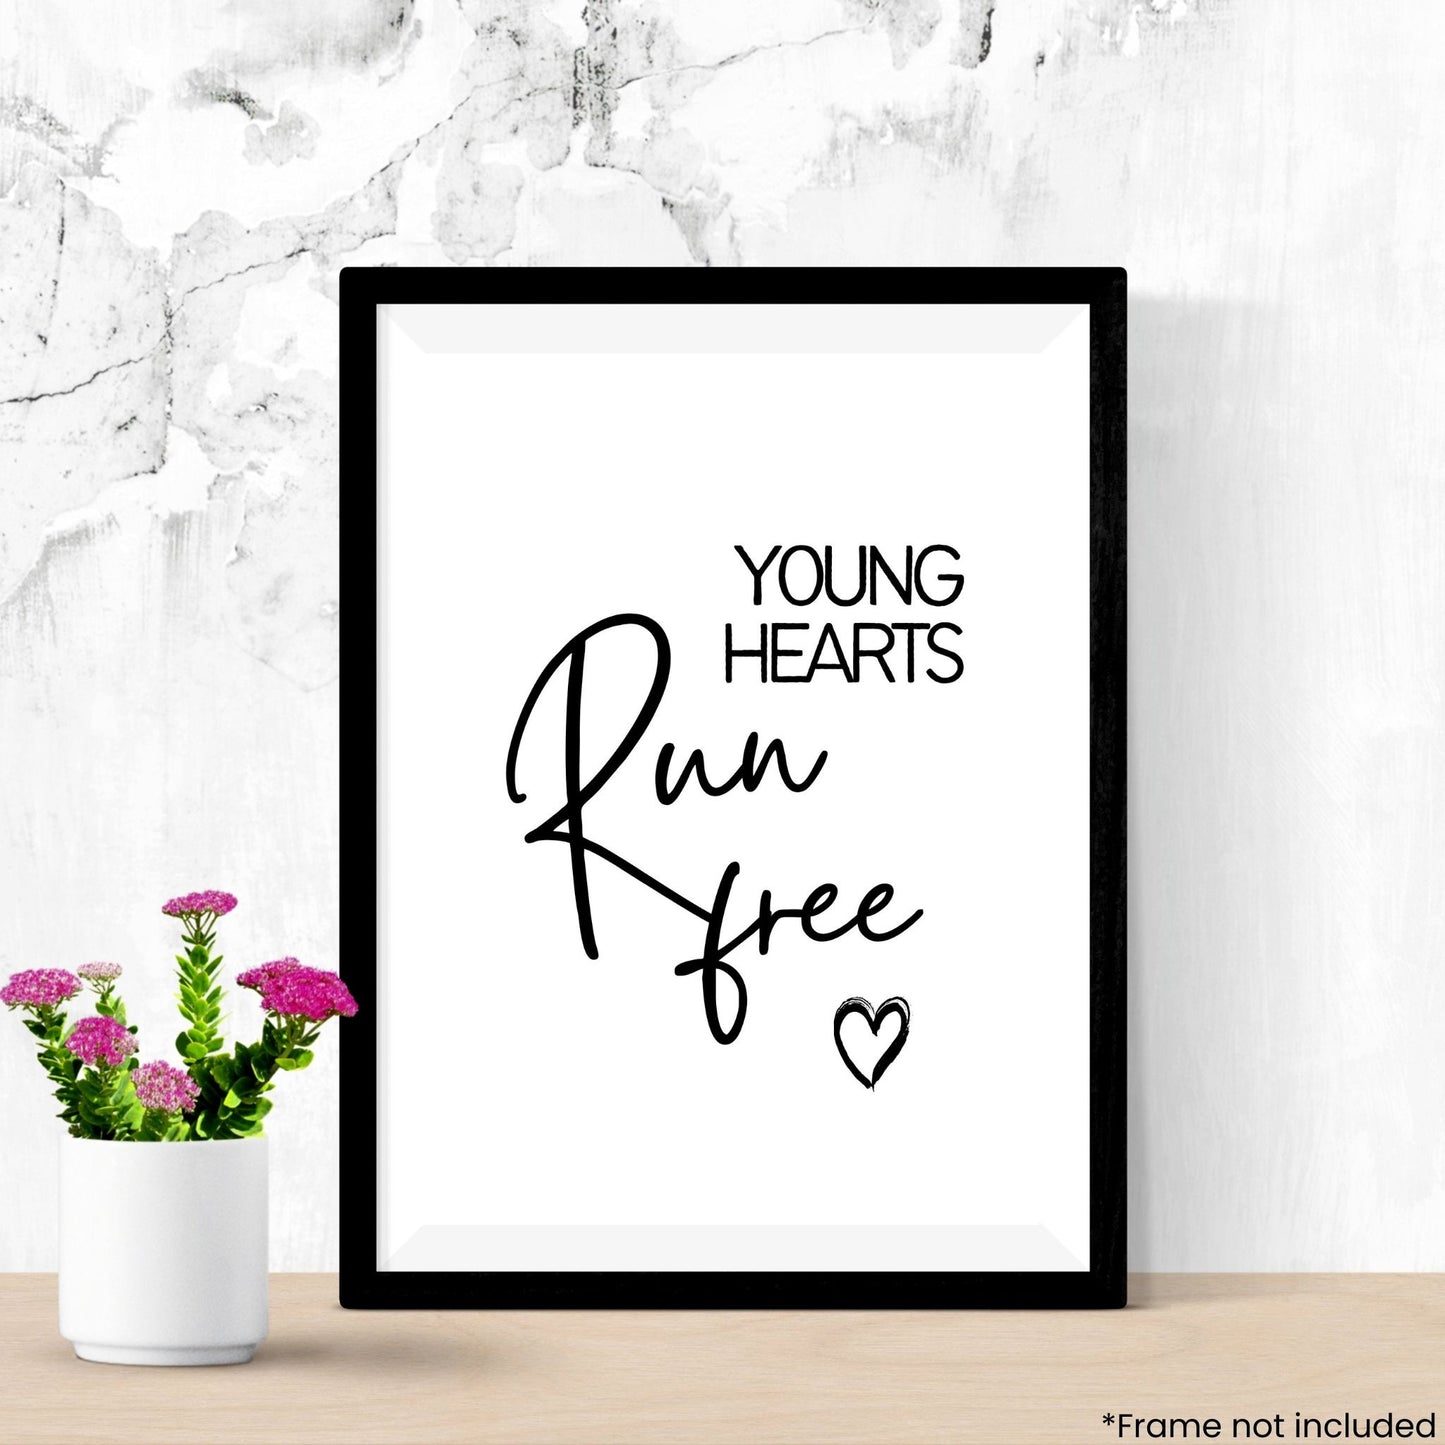 young-hearts-run-free in frame